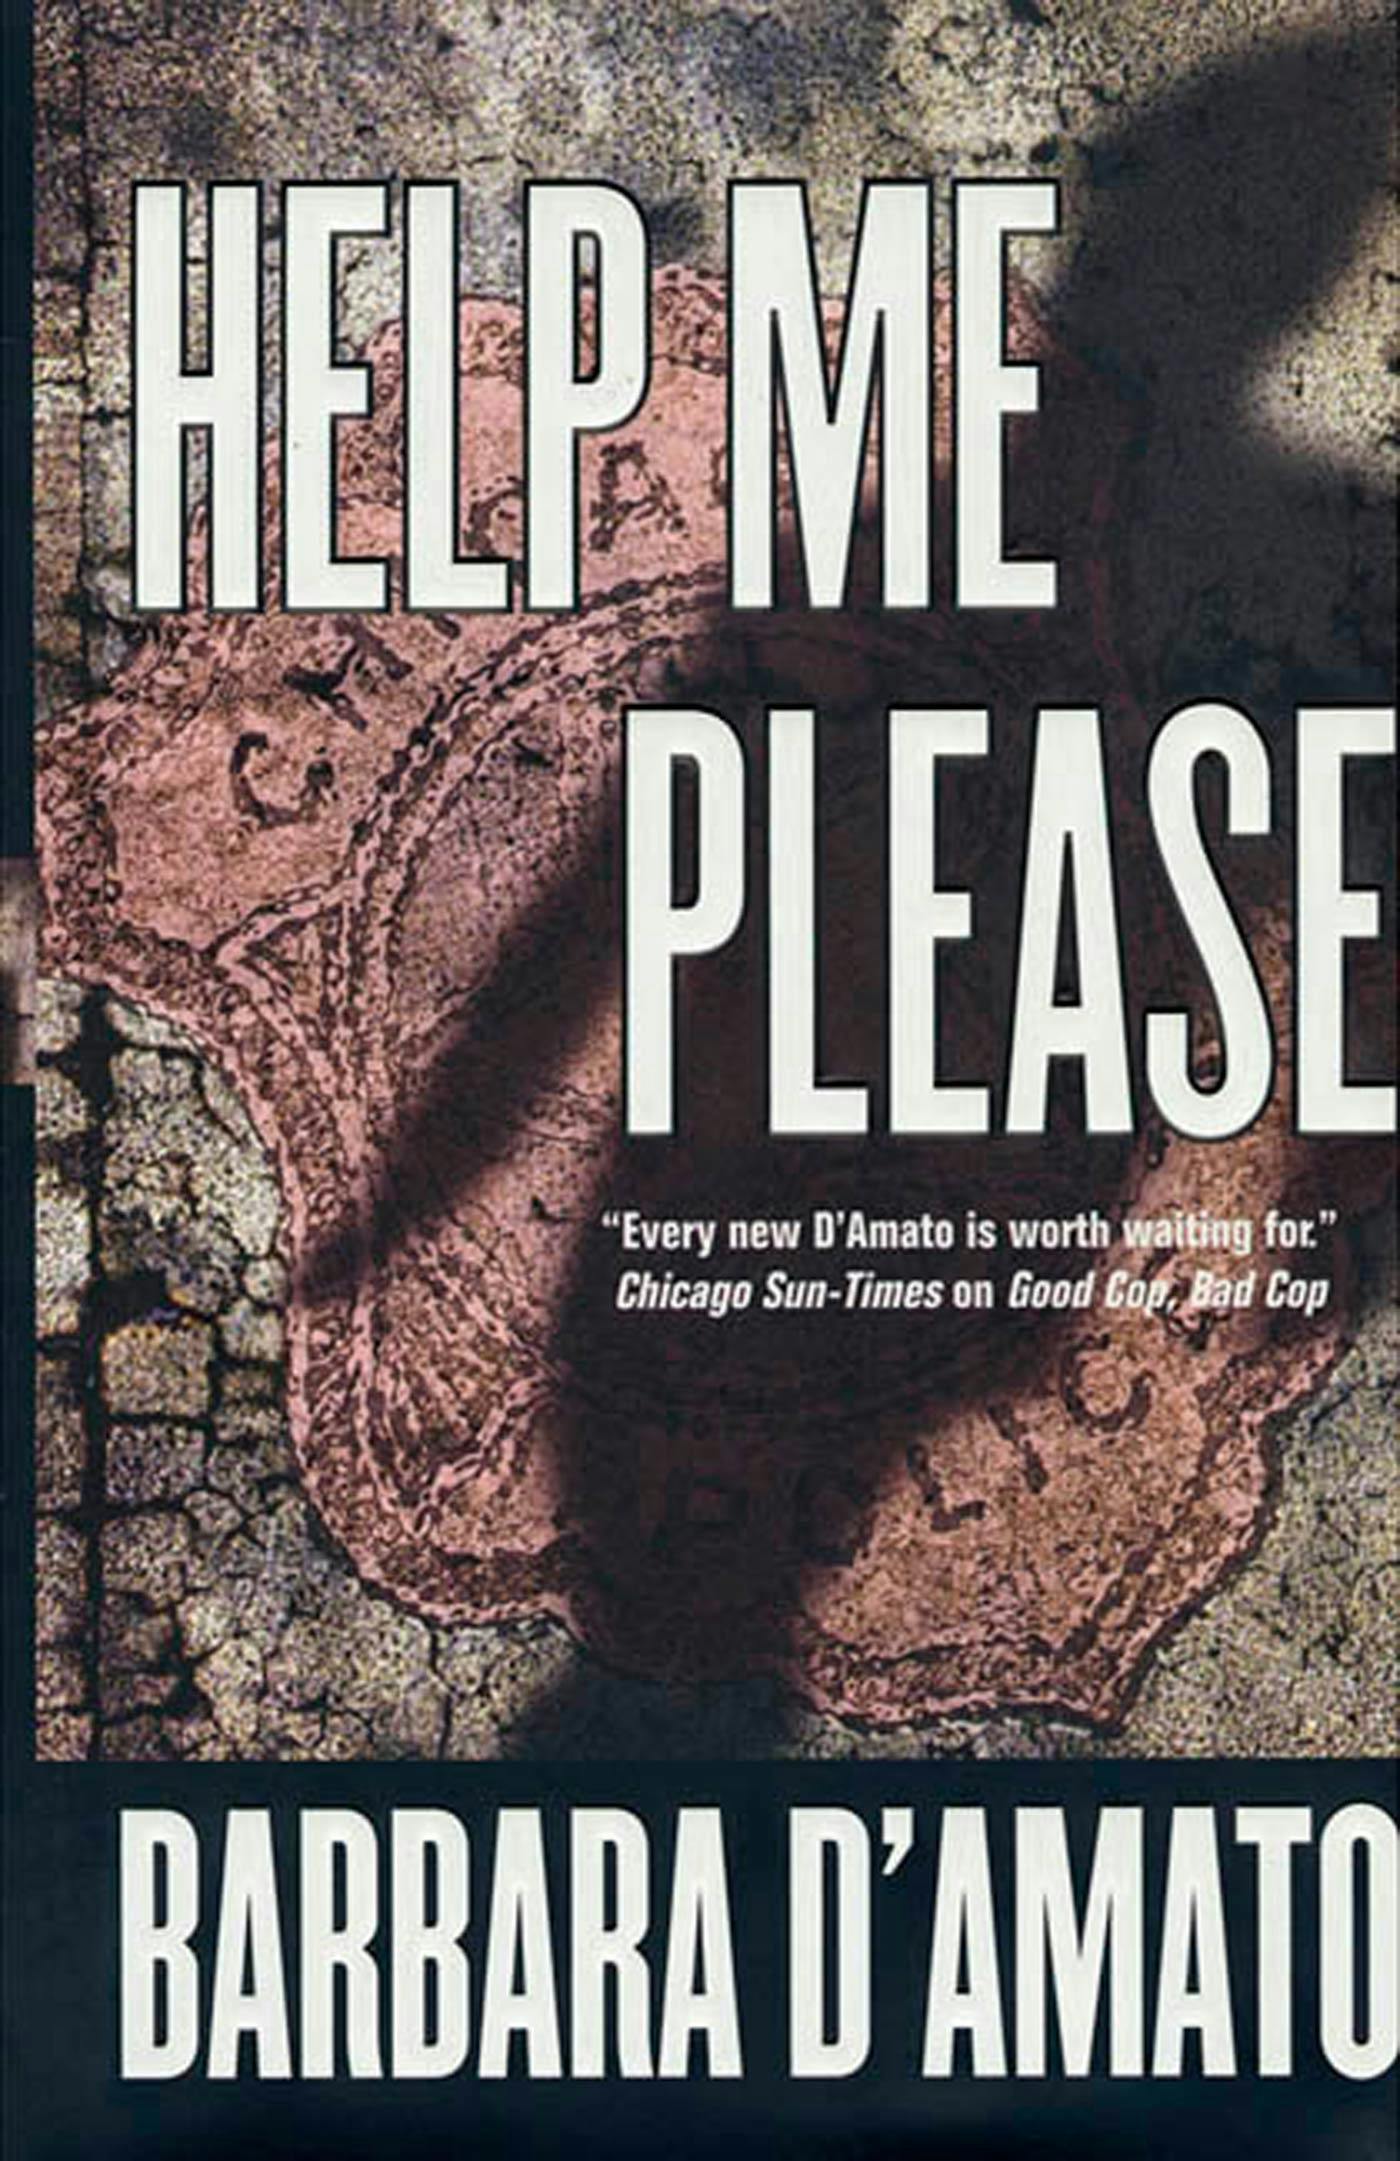 Cover for the book titled as: Help Me Please